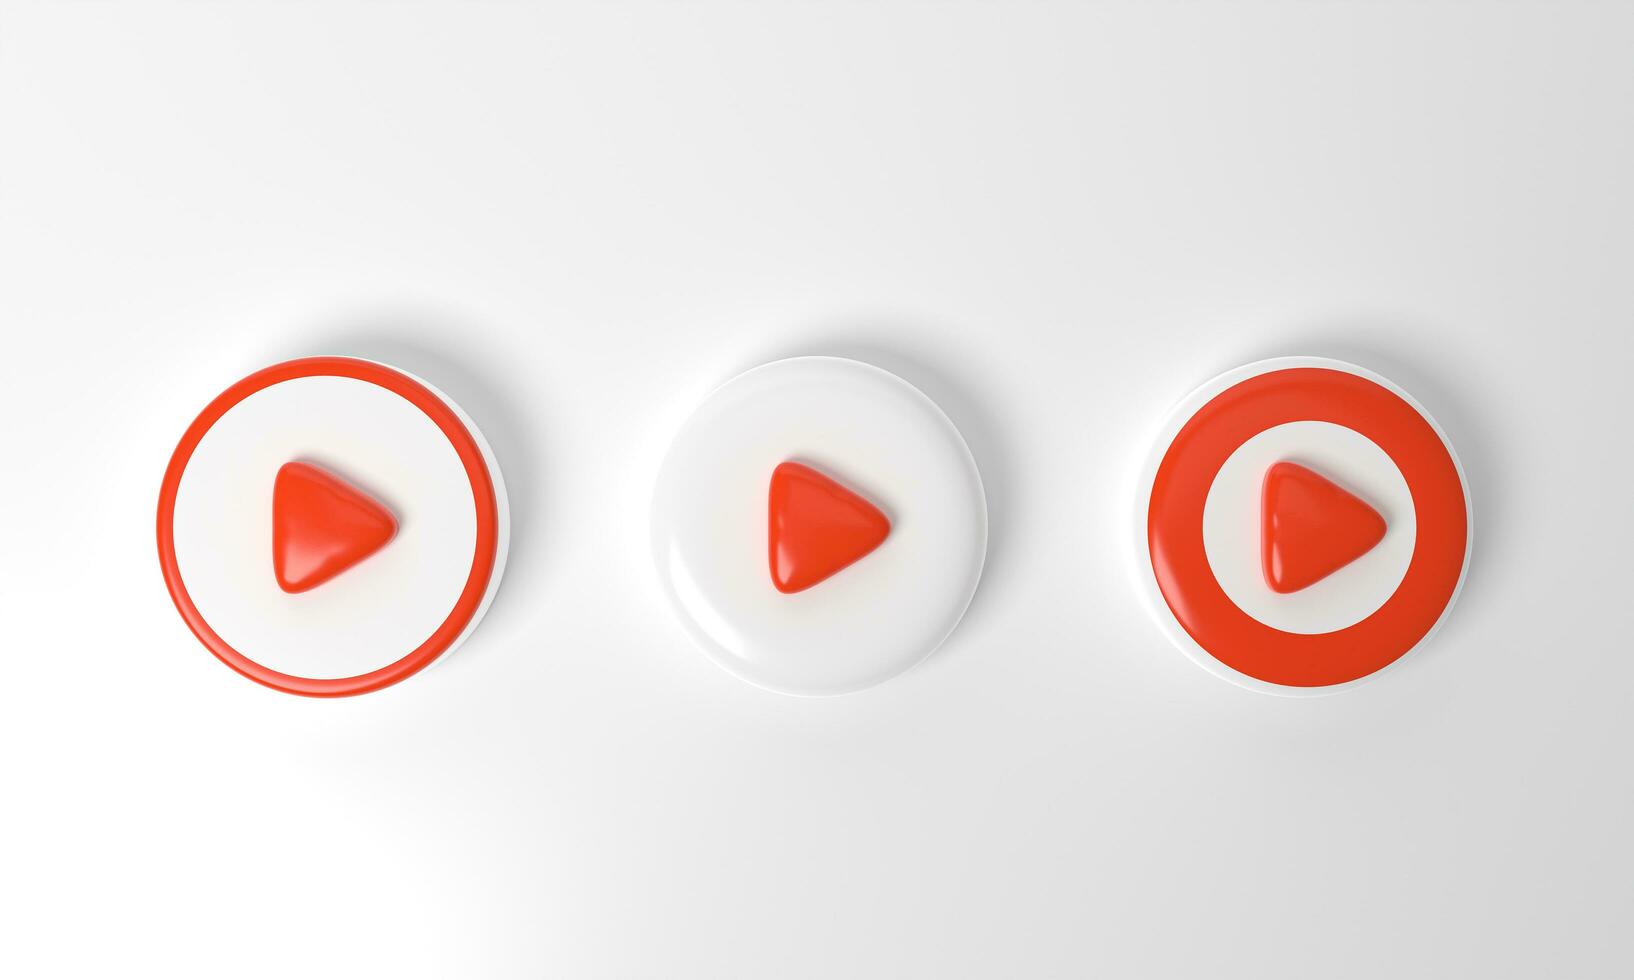 red circle collection colored round play button on pastel background. Concept of video icon logo for play clip, audio playback. 3d rendering. Play interface symbol. social media and website posts photo